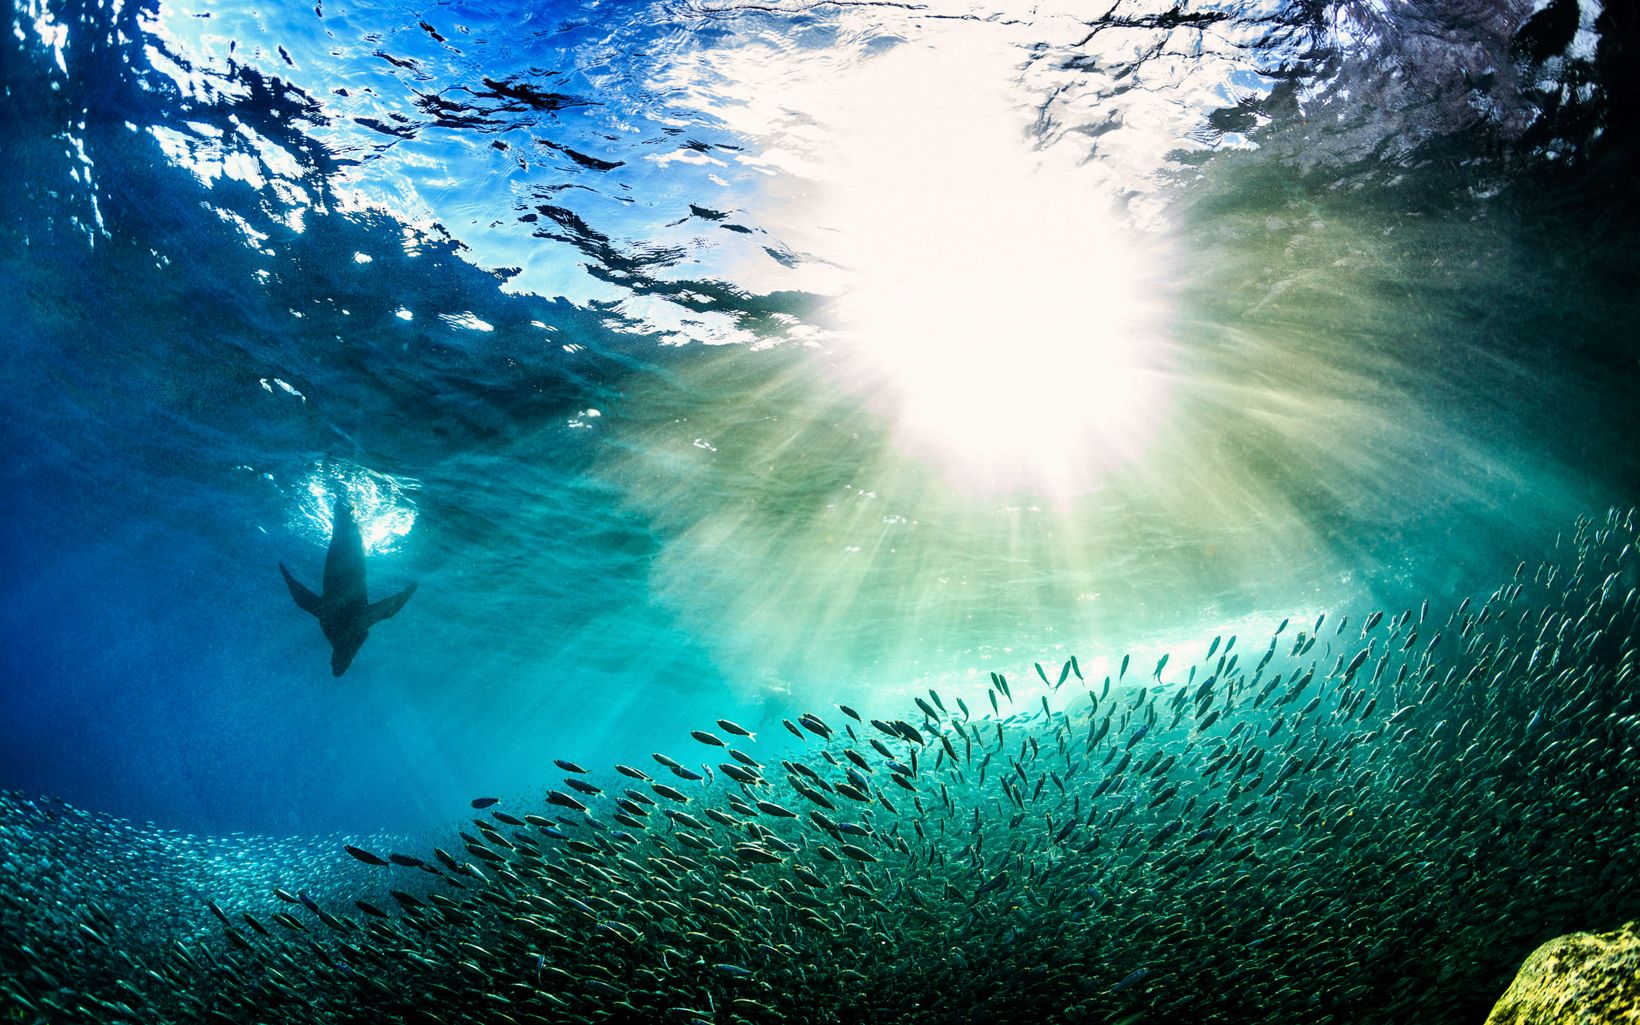 A sea lion dives in the water above a school of fish.